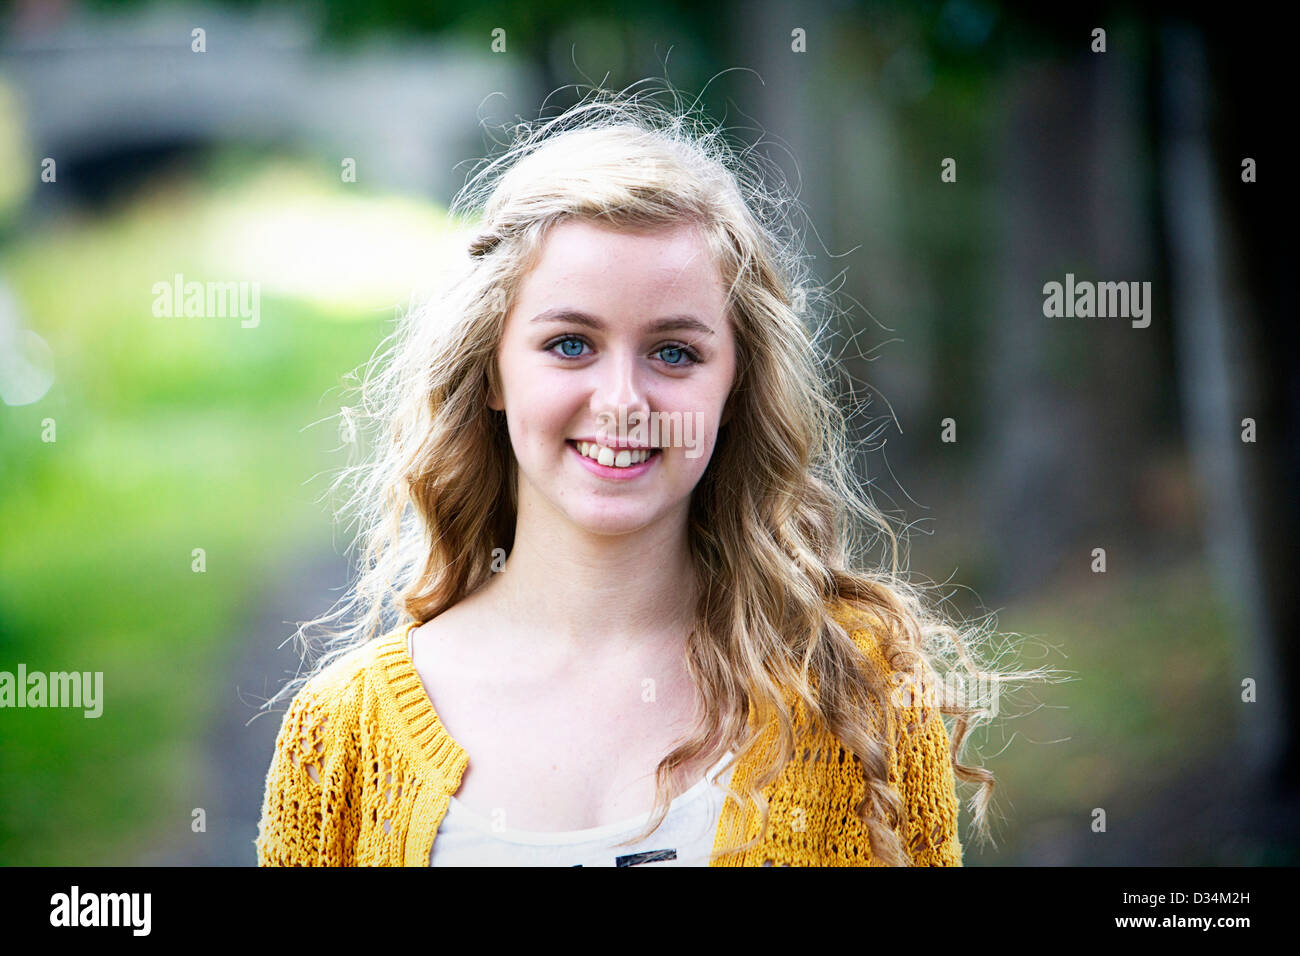 Young adult blond girl headshot Stock Photo